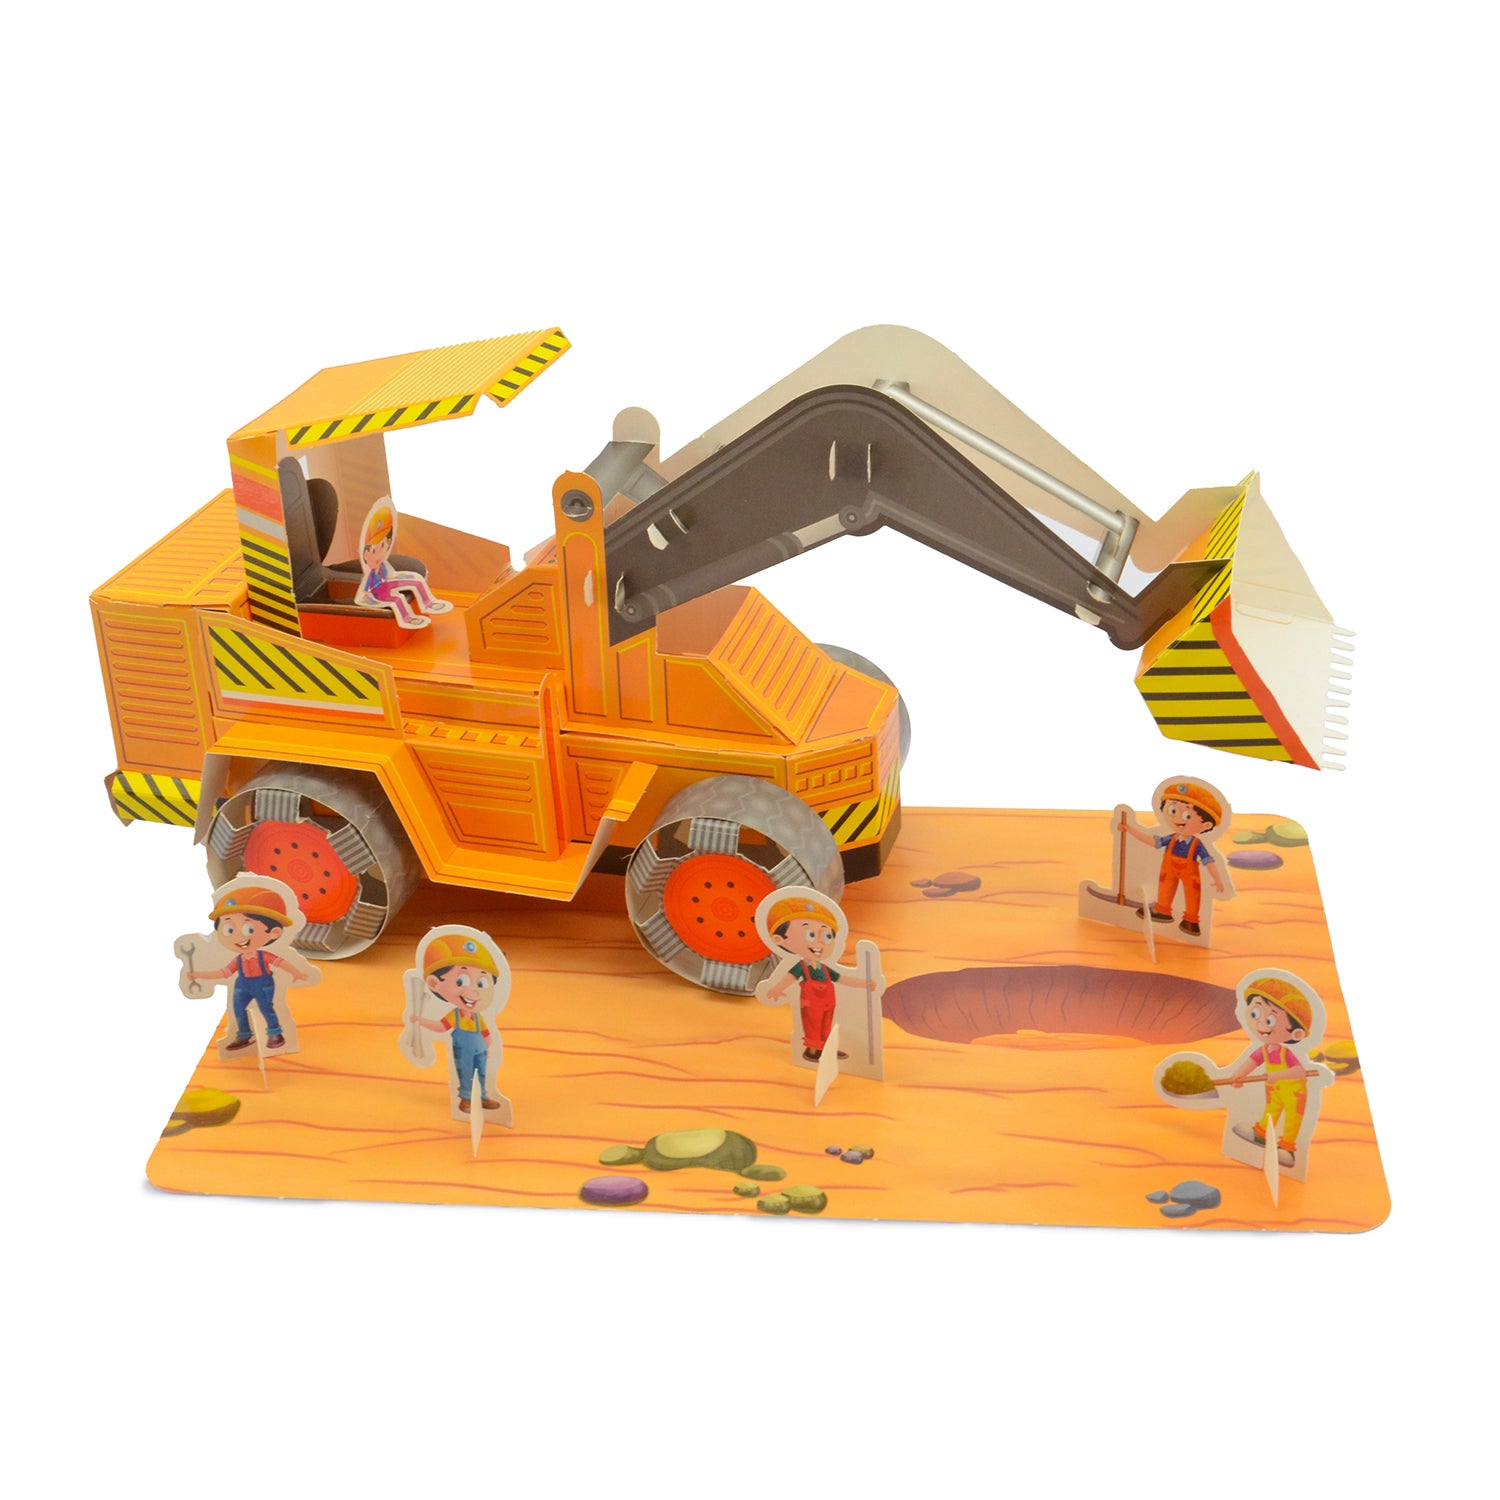 Digger - Make Your Own | Fun & Learning | Kids Activity Books